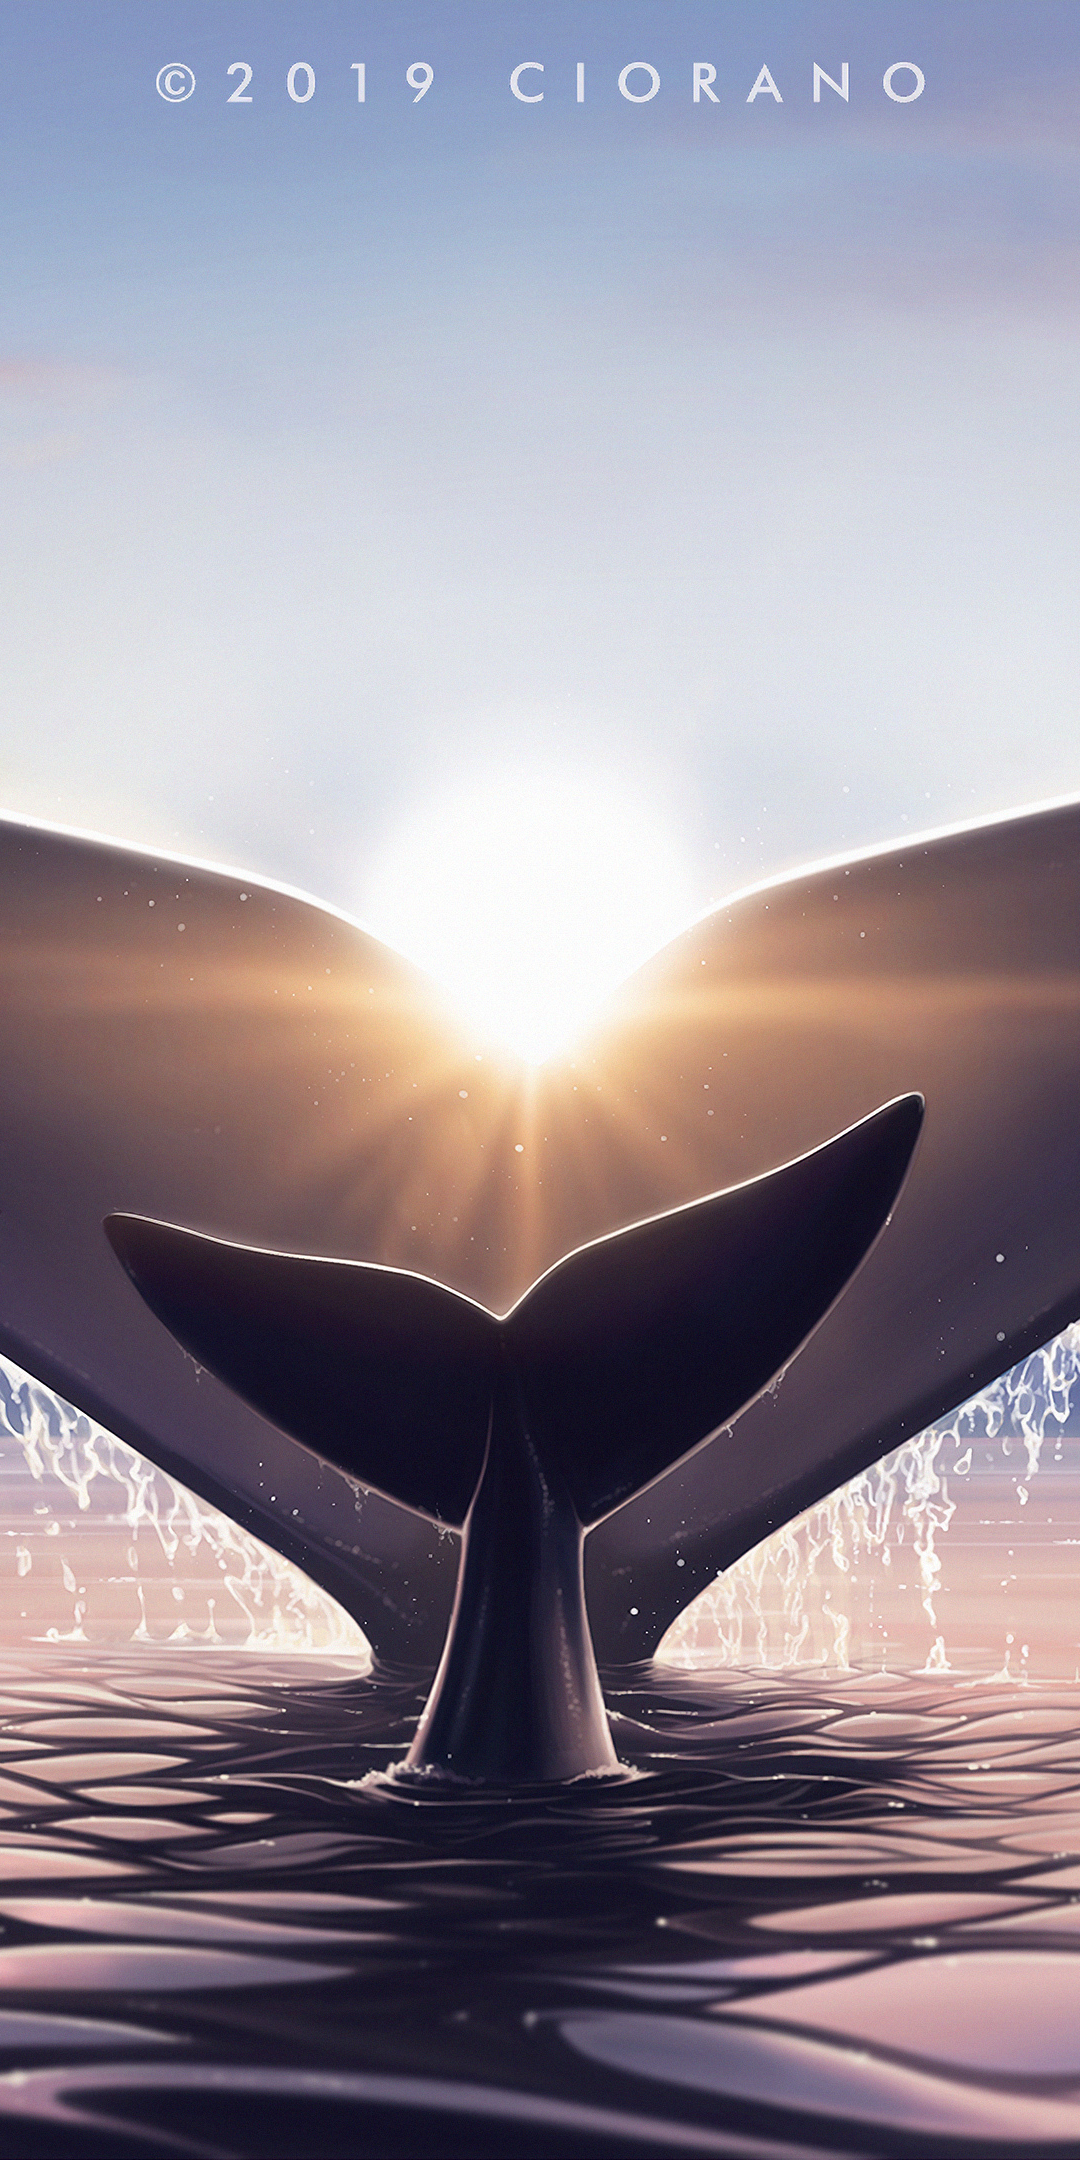 Ocean's family, whale fish and baby fish, twilight, 1080x2160 wallpaper